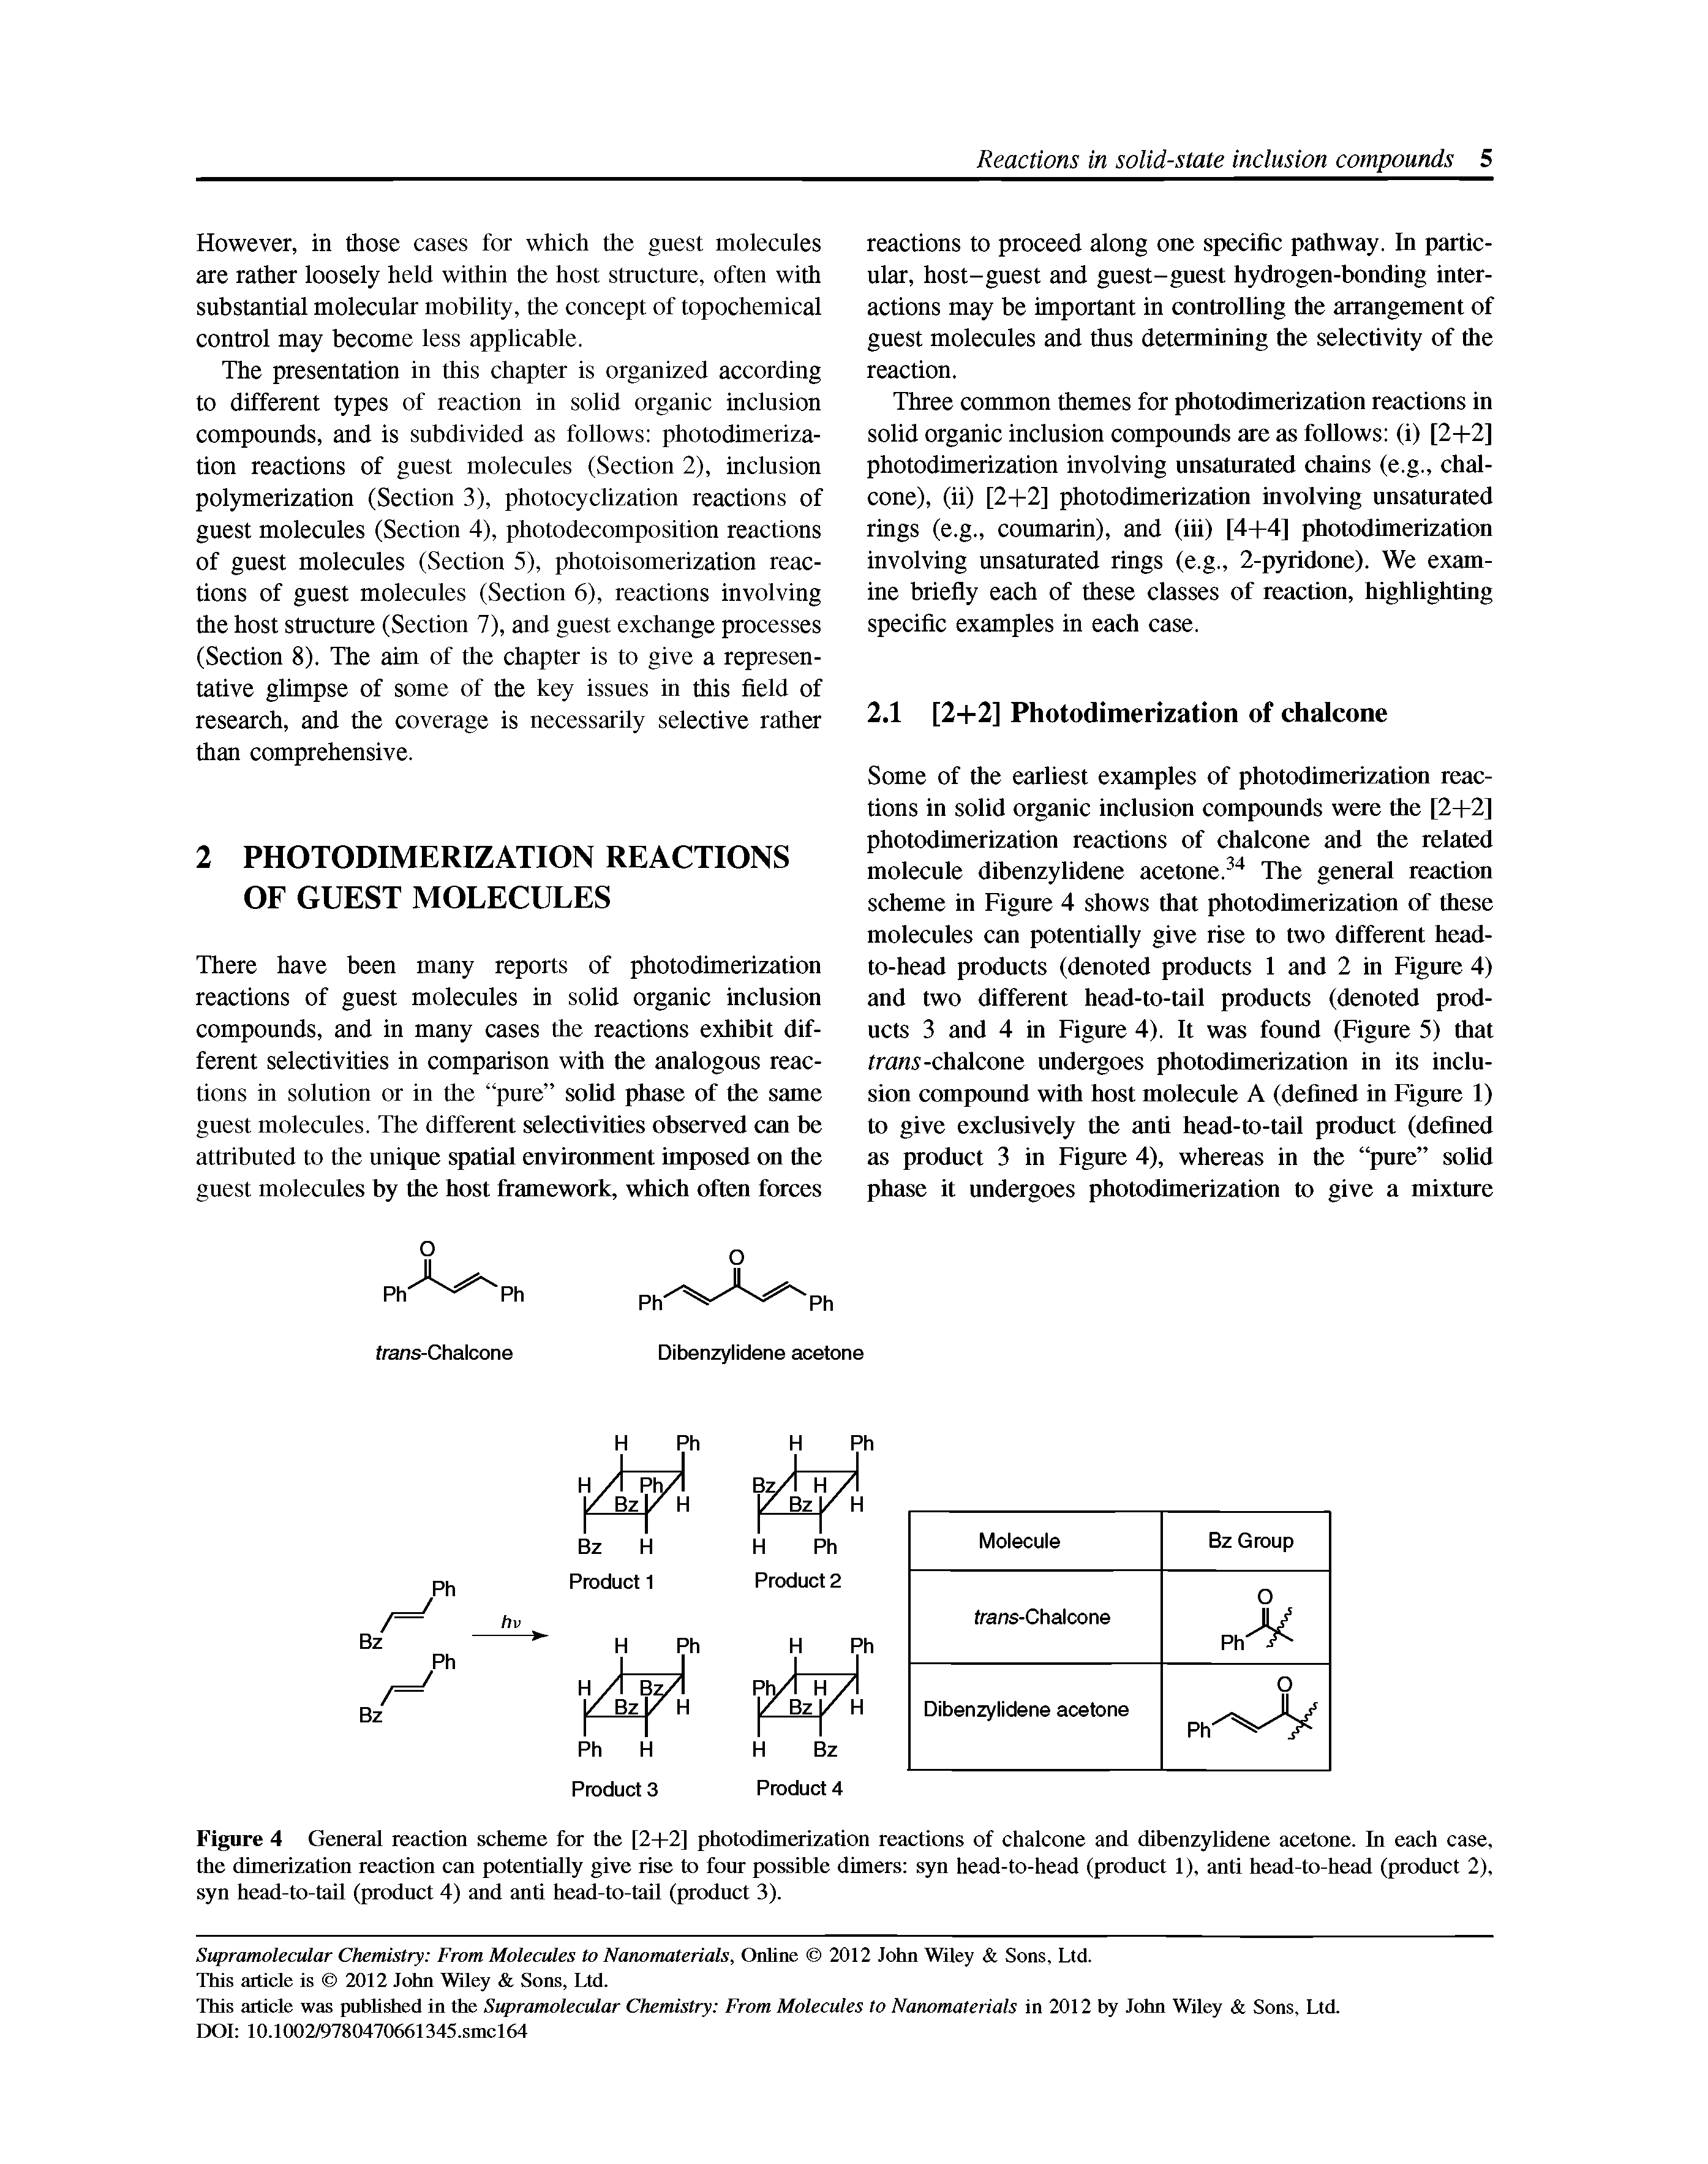 Figure 4 General reaction scheme for the [2-1-2] photodimerization reactions of chalcone and dibenzylidene acetone. In each case, the dimerization reaction can potentially give rise to four possible dimers syn head-to-head (product 1), anti head-to-head (product 2), syn head-to-tail (product 4) and anti head-to-tail (product 3).